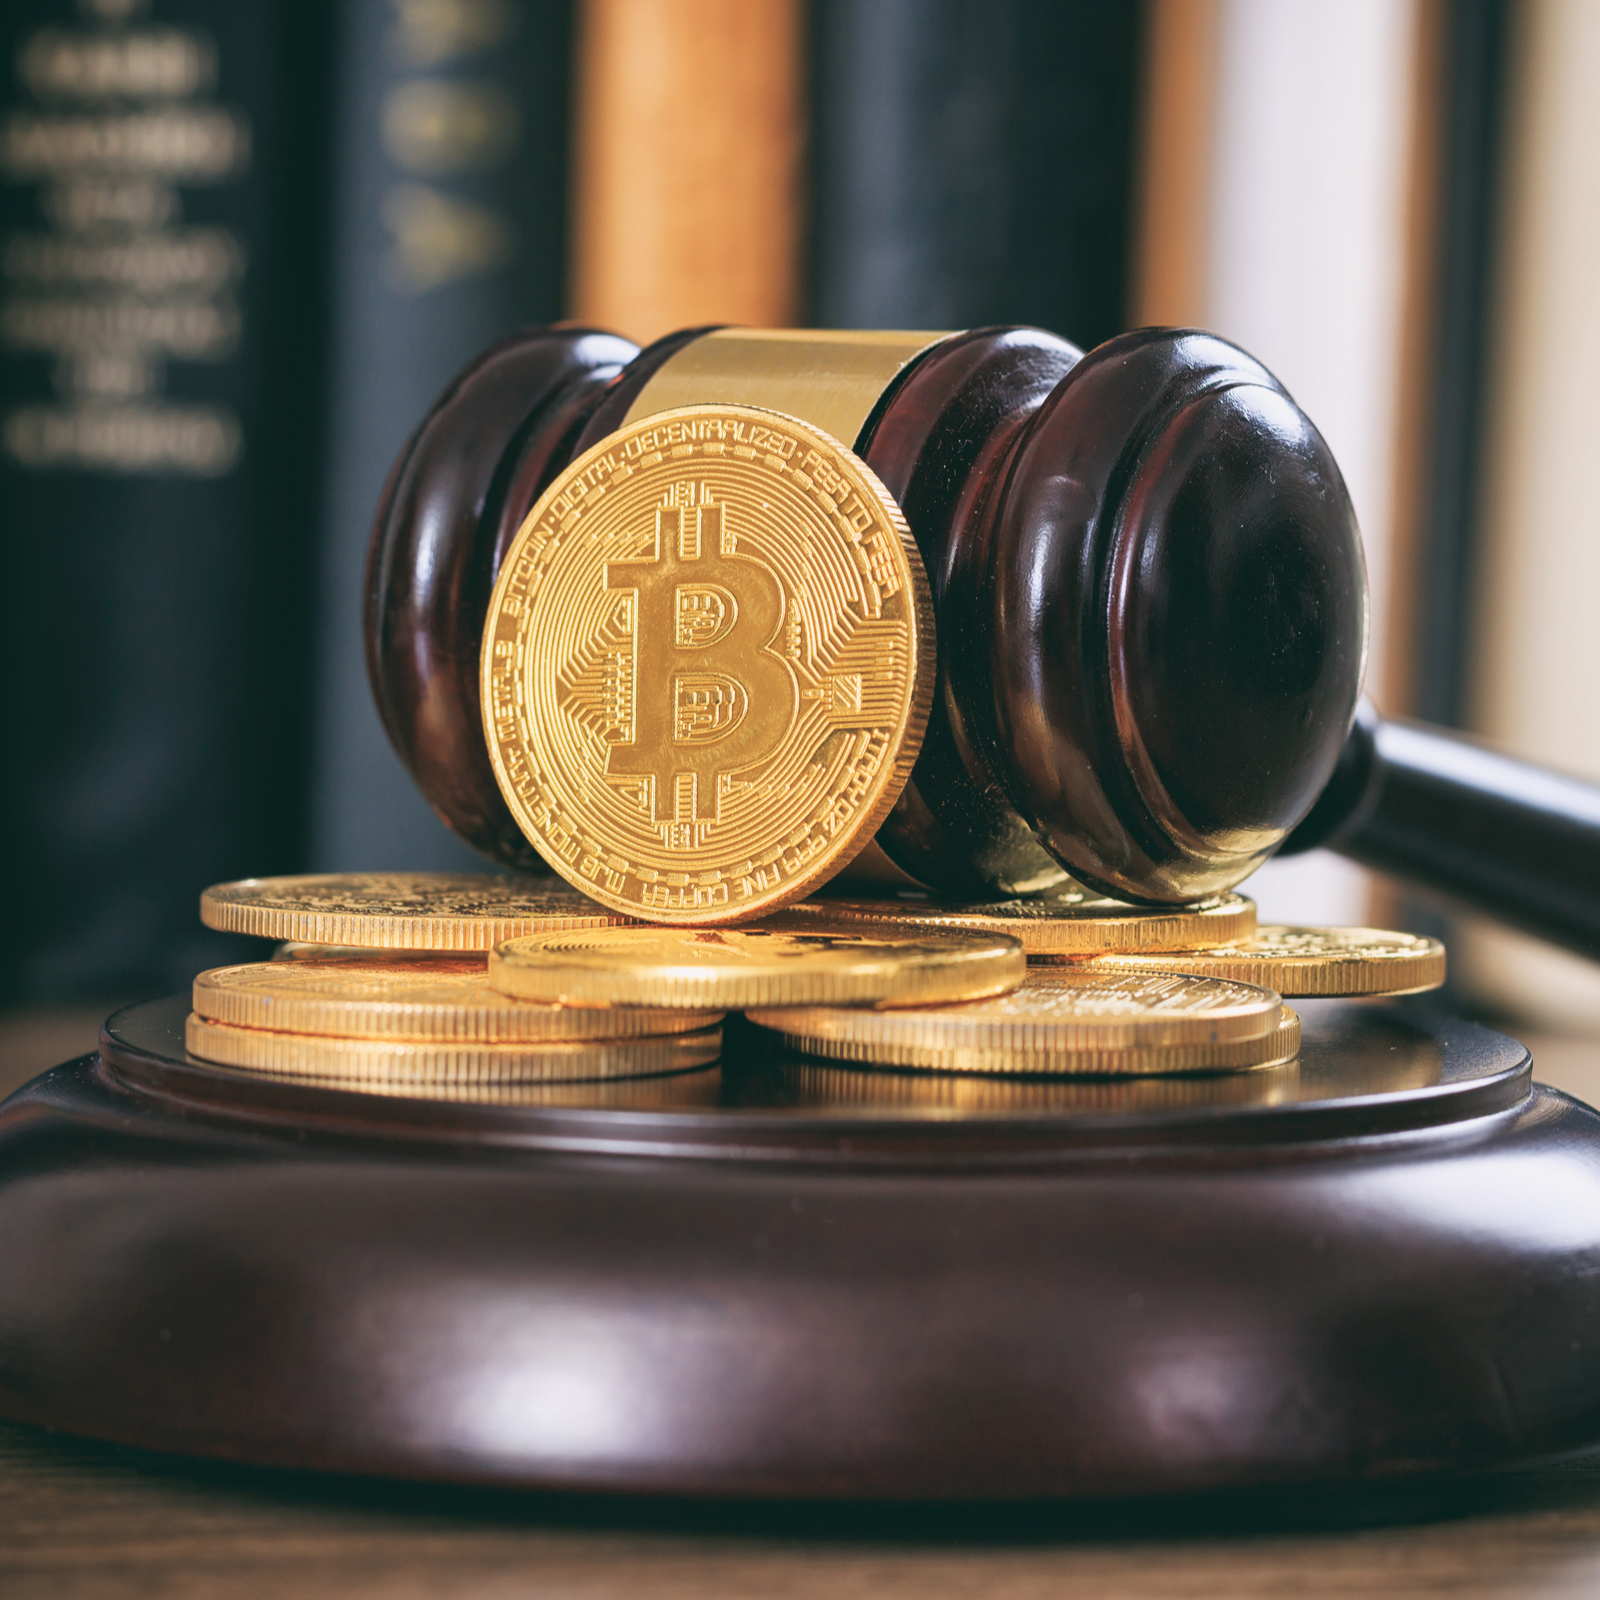 US Marshals Service Announces Upcoming Auction of 660 BTC